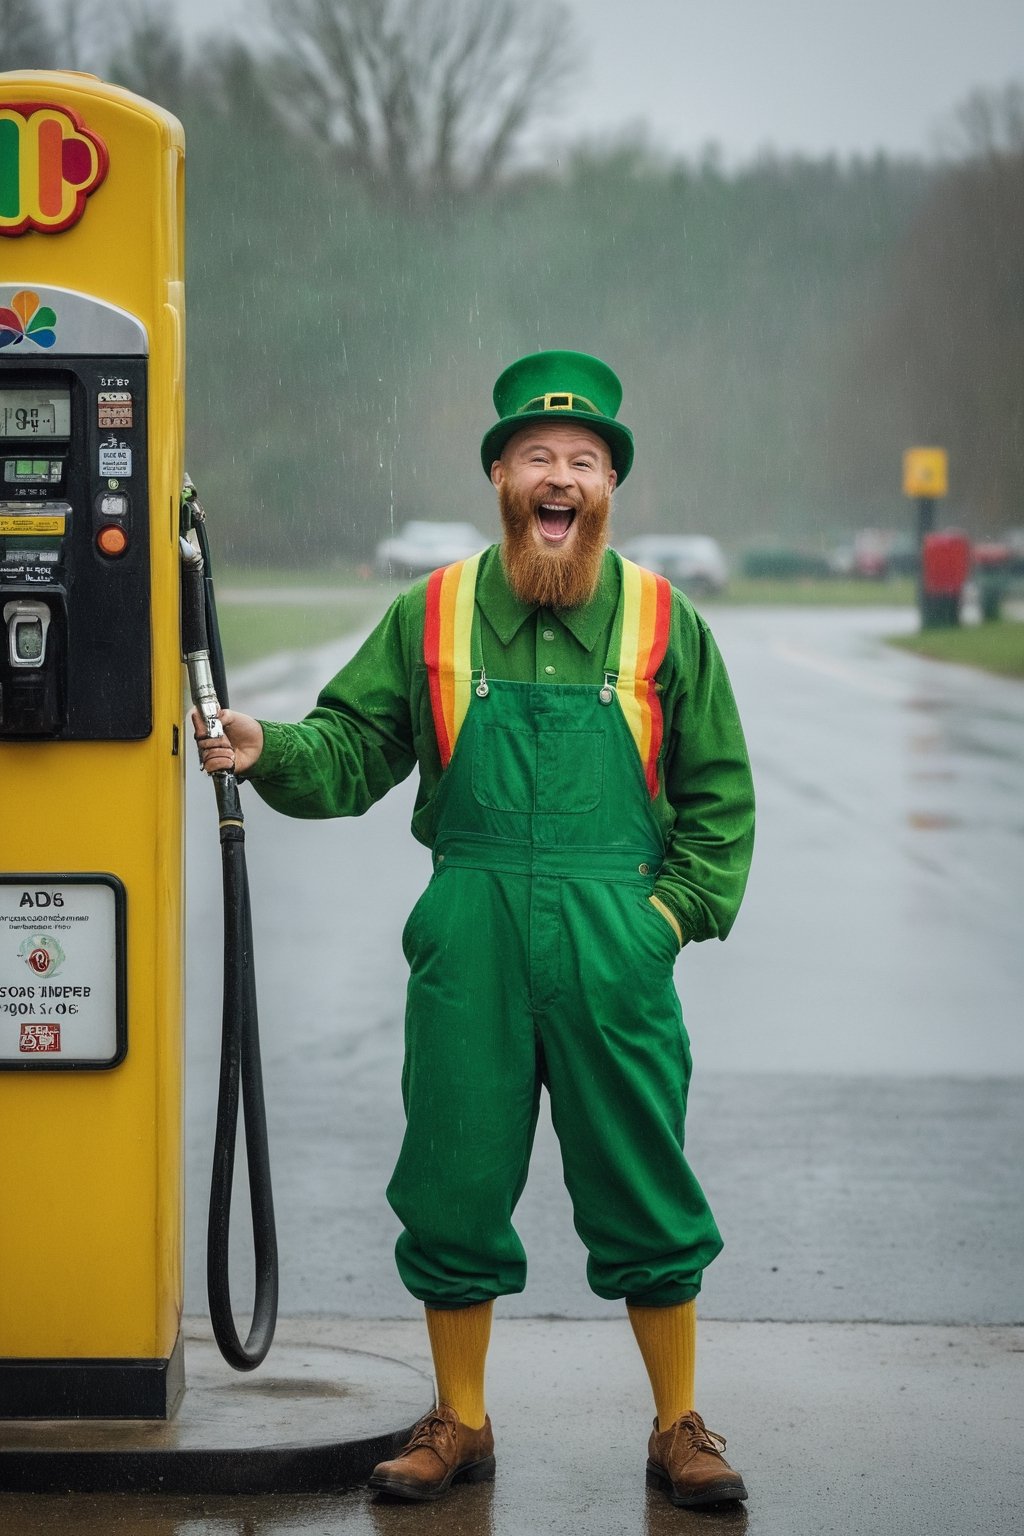 an ecstatic leprechaun is pouring a rainbow from a gas pump at a gas station in the rain. dressed in green overalls with four leaf clover stitching. warm and serene presence. perfect happy eyes, perfect anatomy, artistic composition, best quality, (((masterpiece))), high quality, best details, realistic skin texture, Sony A7R IV, Sony FE 50mm f/1.2 GM, warm natural light